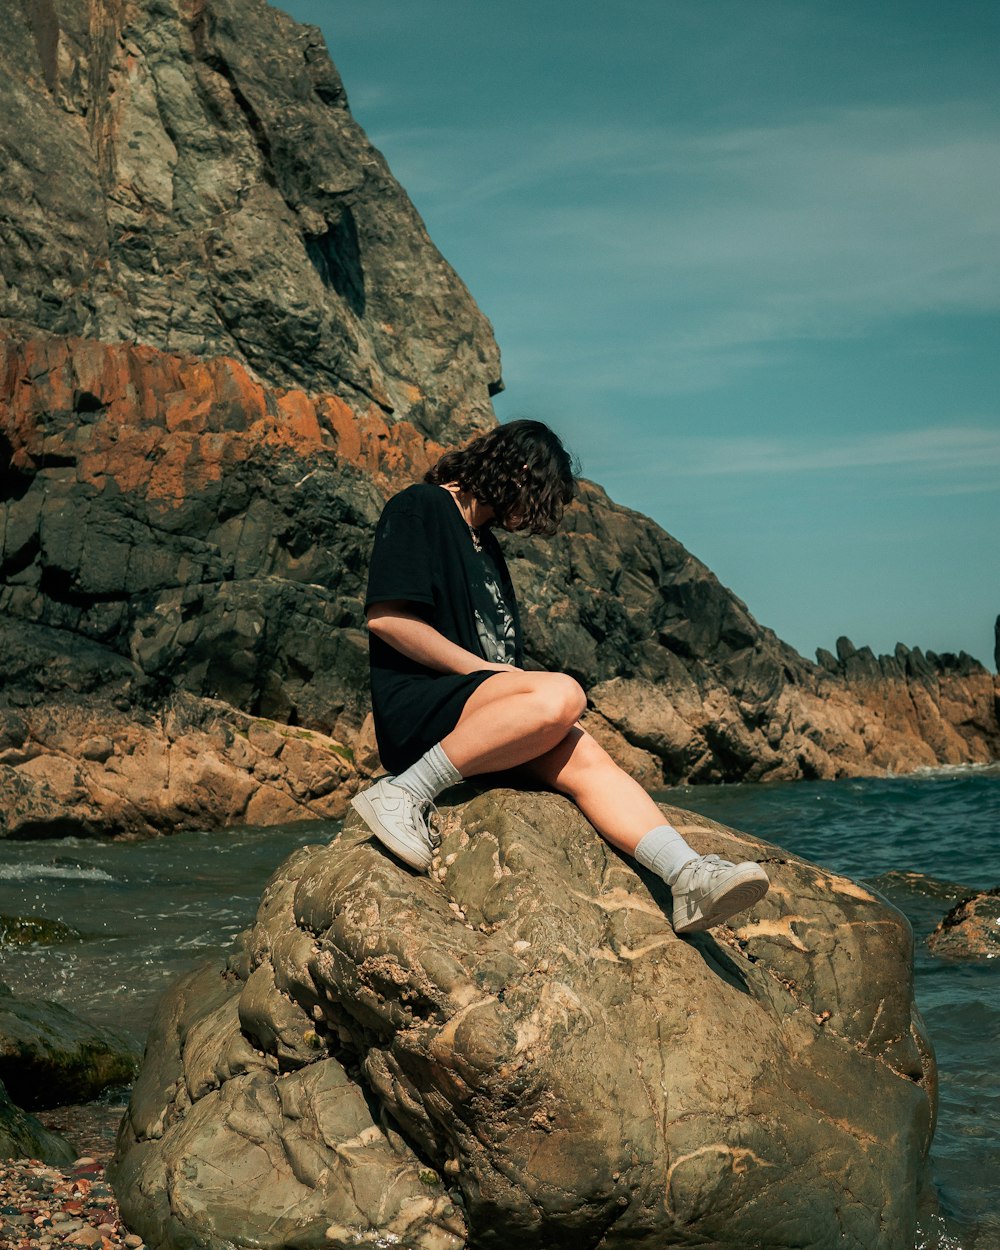 woman in black shirt and white shorts sitting on rock near body of water during daytime